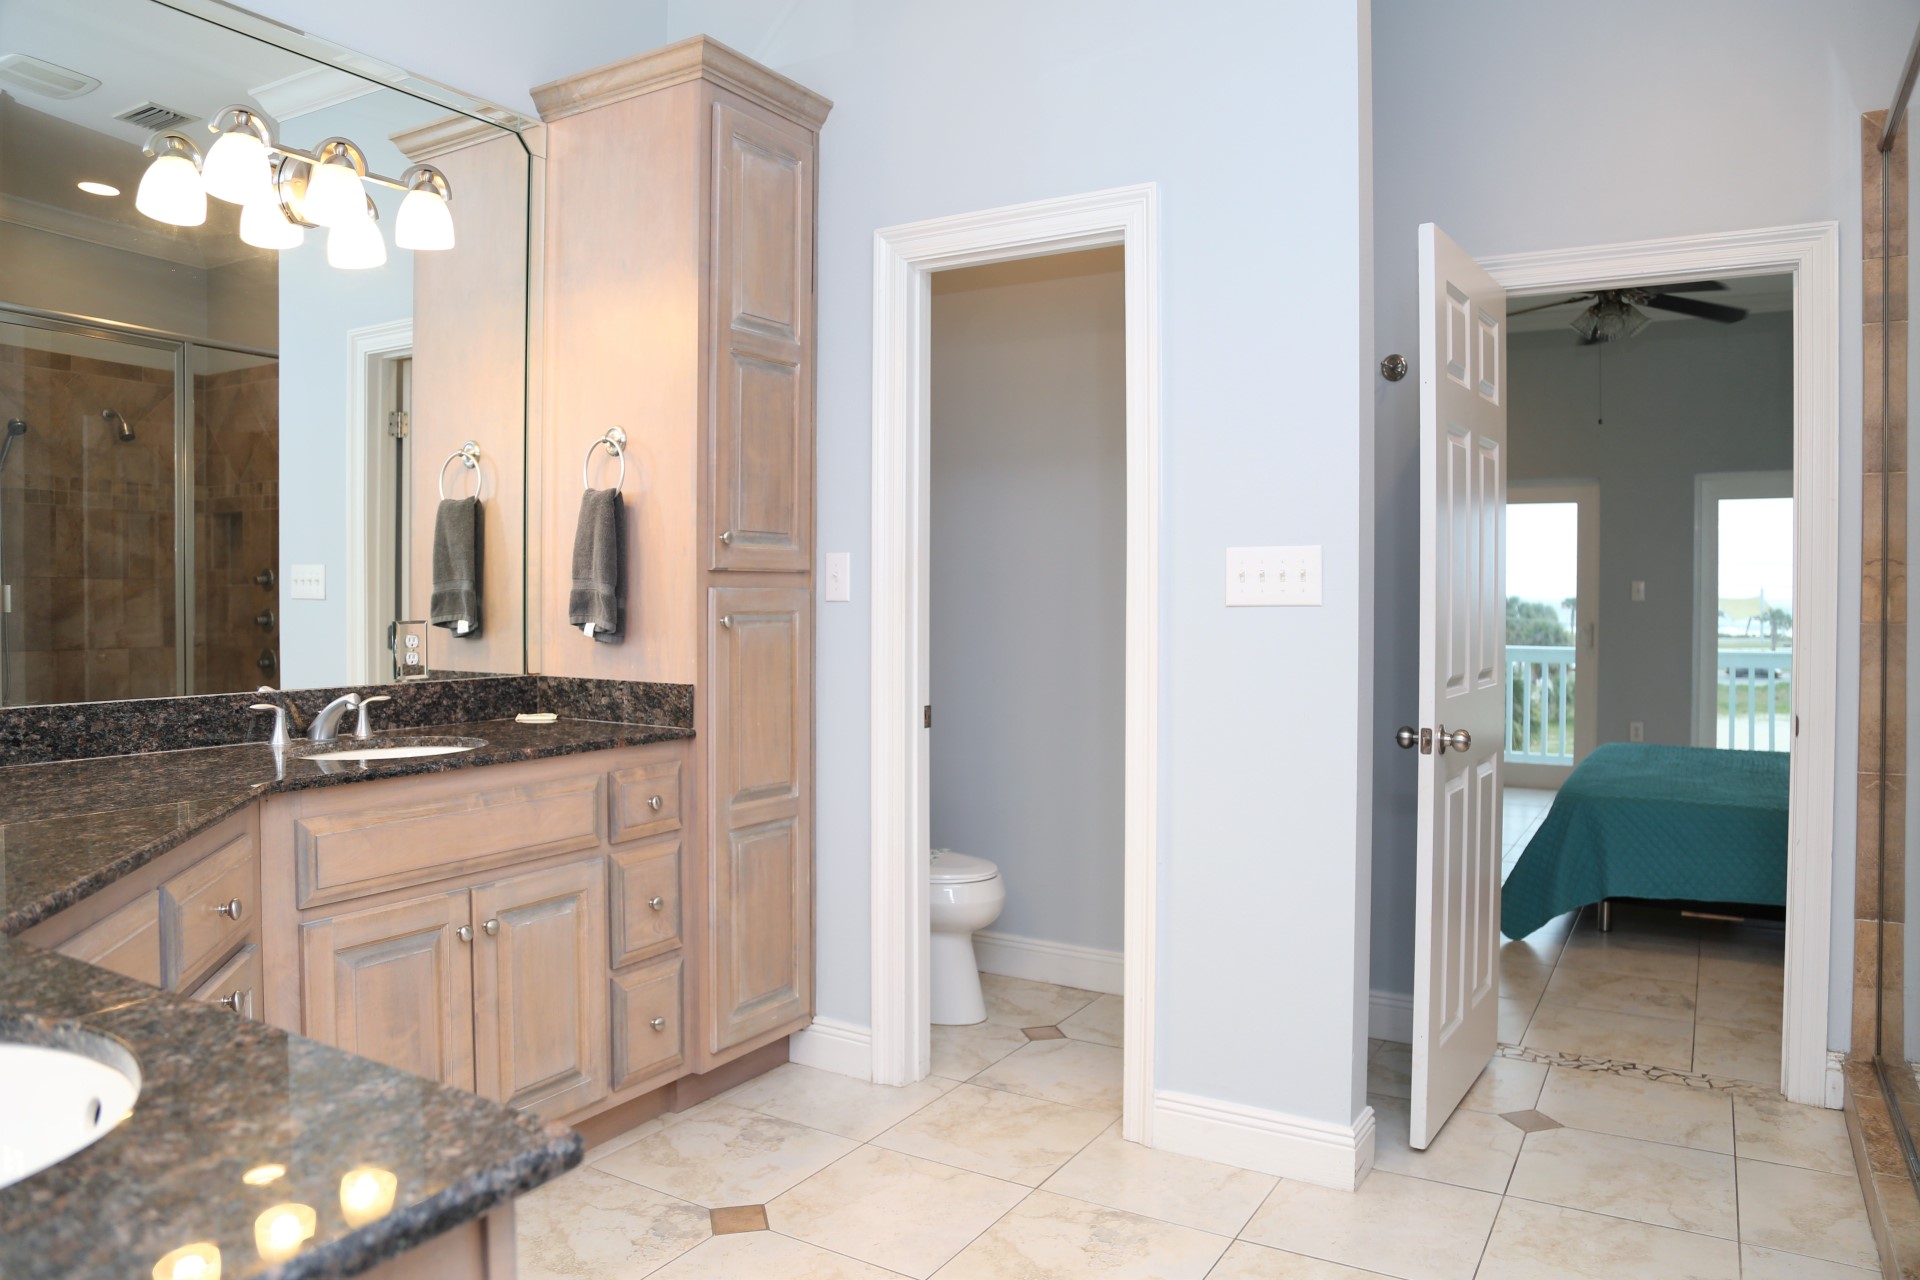 Large master bathroom with large double vanity, separate ste